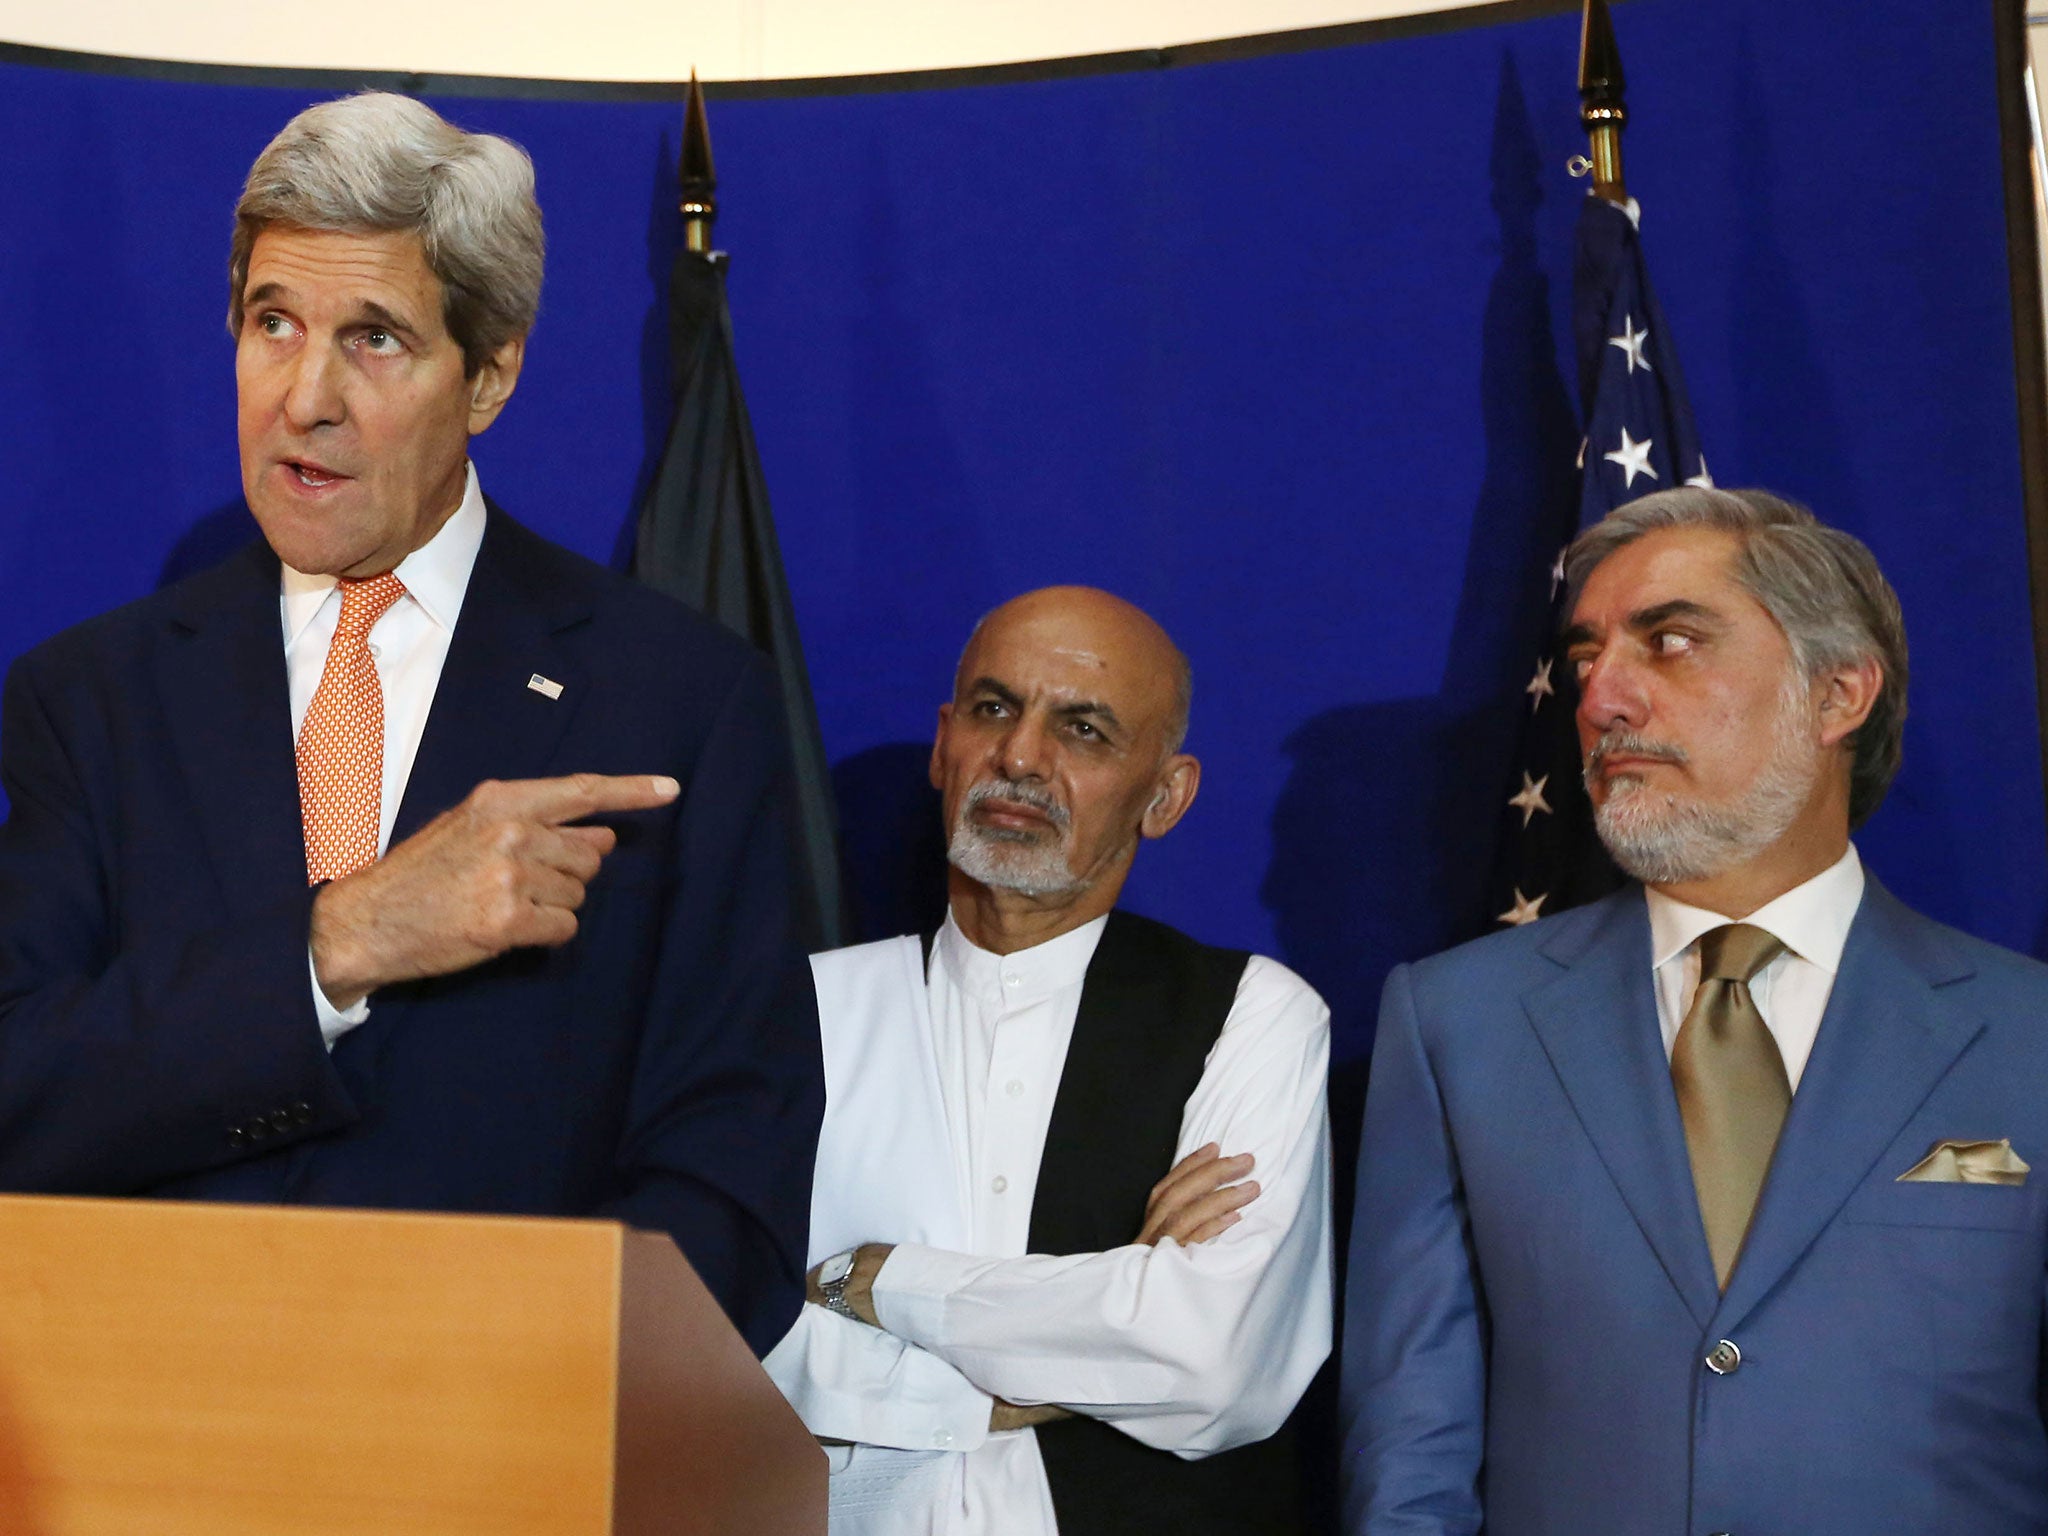 FILE - In this Friday, Aug. 8, 2014 file photo, US Secretary of State John Kerry, from left, speaks as Afghan presidential candidates Ashraf Ghani Ahmadzai and Abdullah Abdullah listen in Kabul